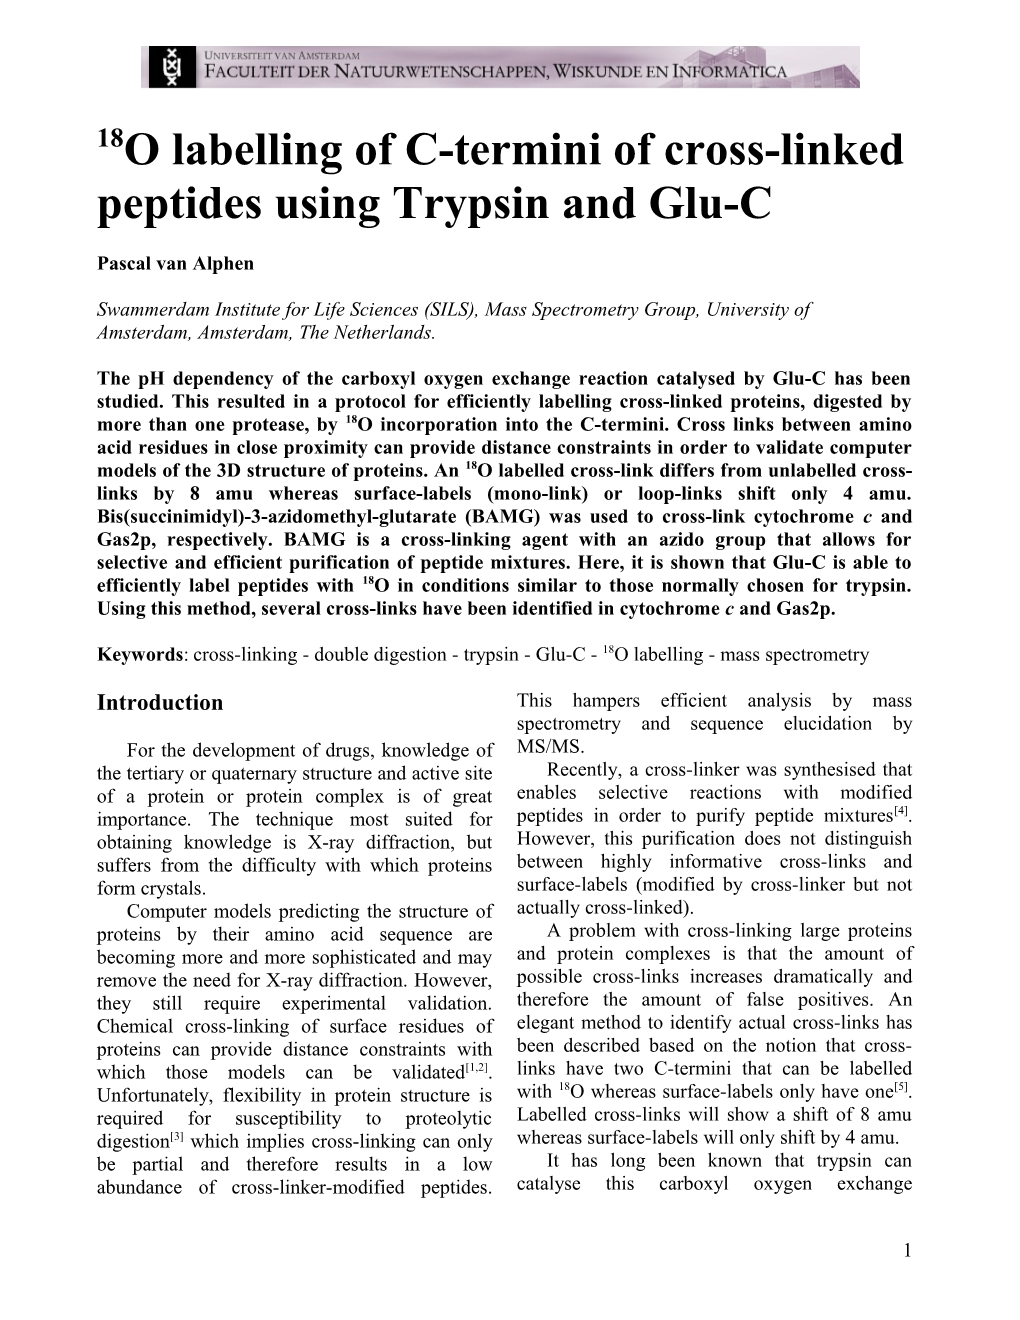 18O Labeling of C-Termini of Cross-Linked Peptides Using Trypsin and Glu-C